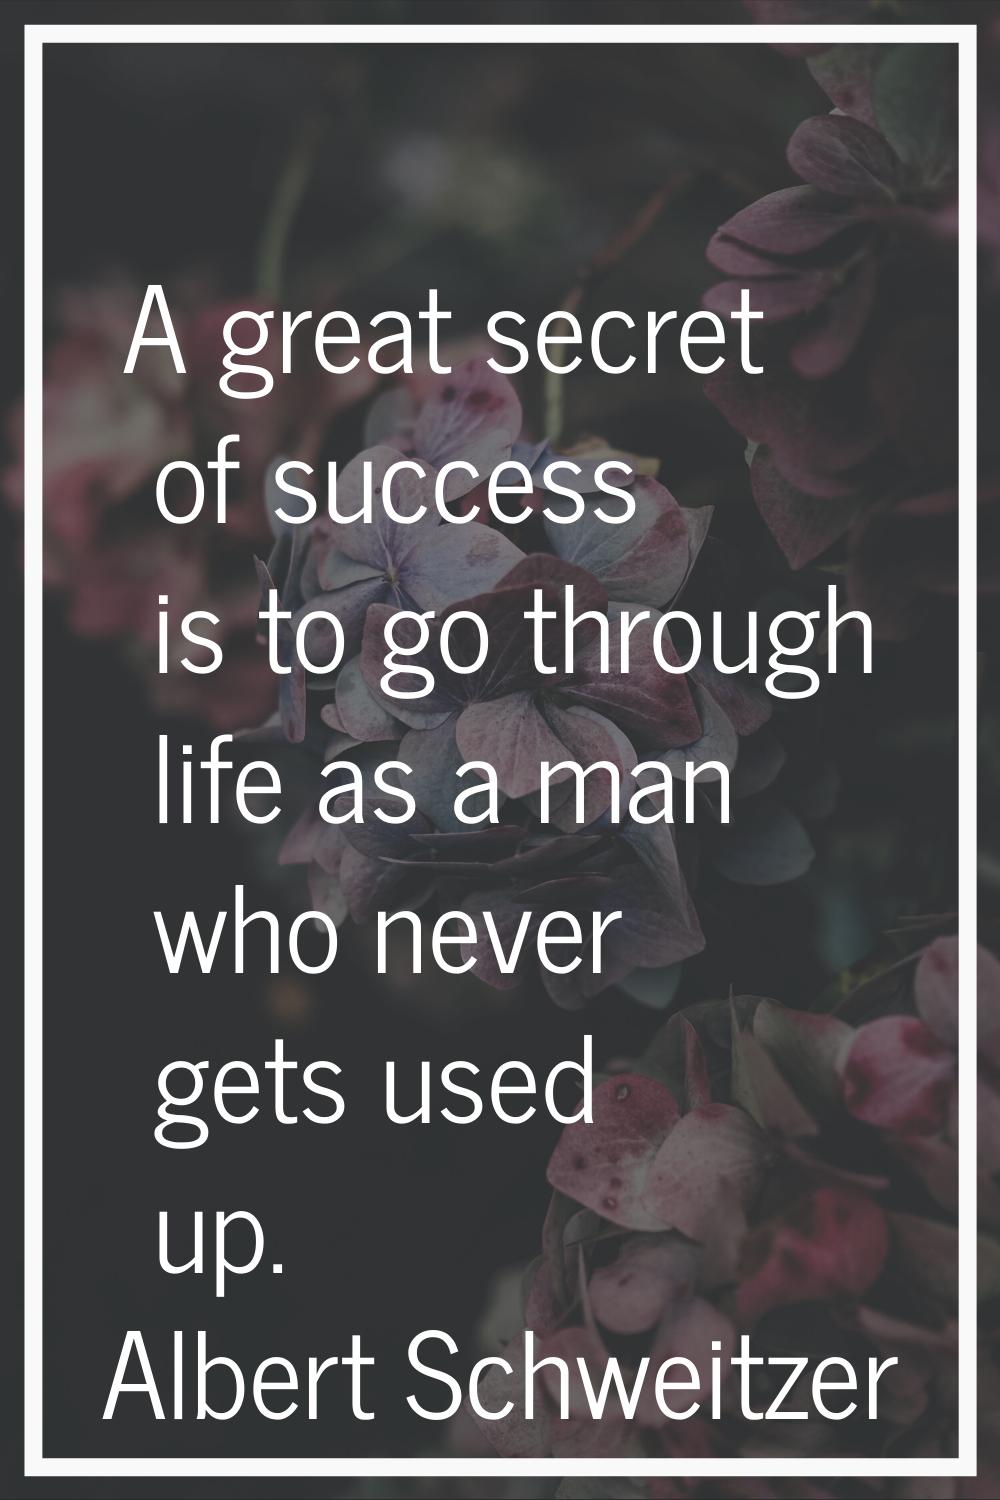 A great secret of success is to go through life as a man who never gets used up.